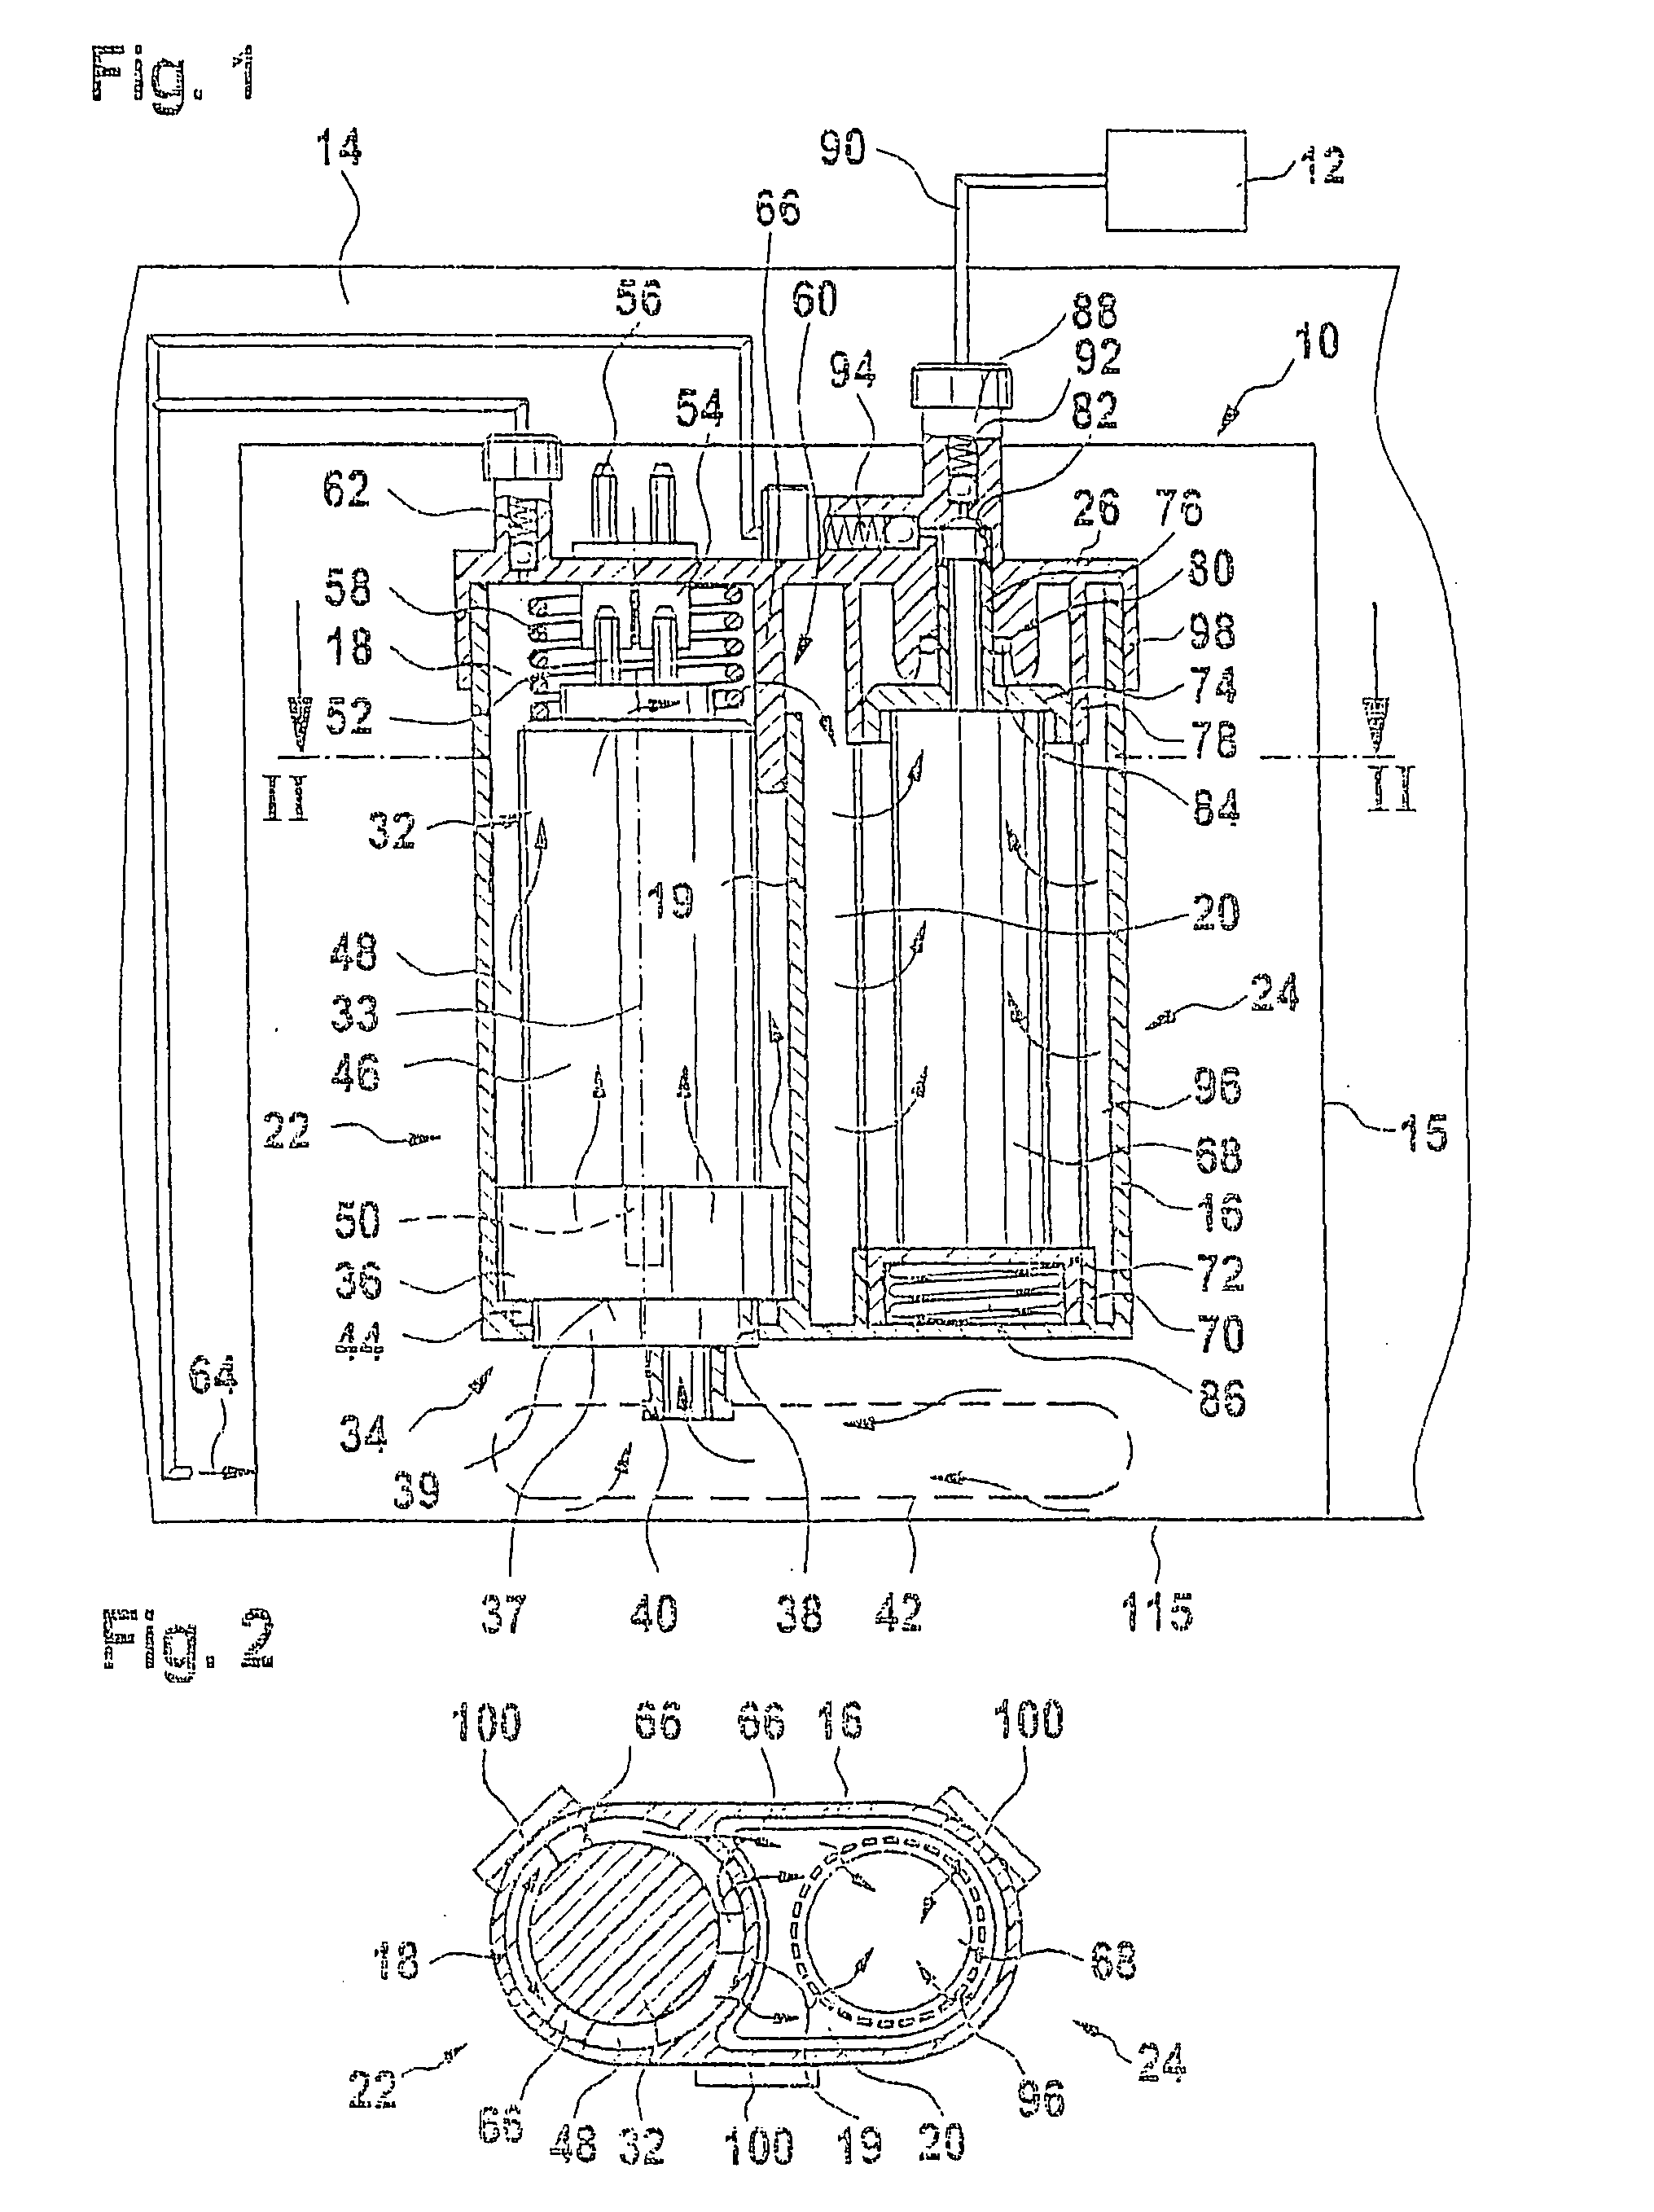 Fuel transporting device for a motor vehicle